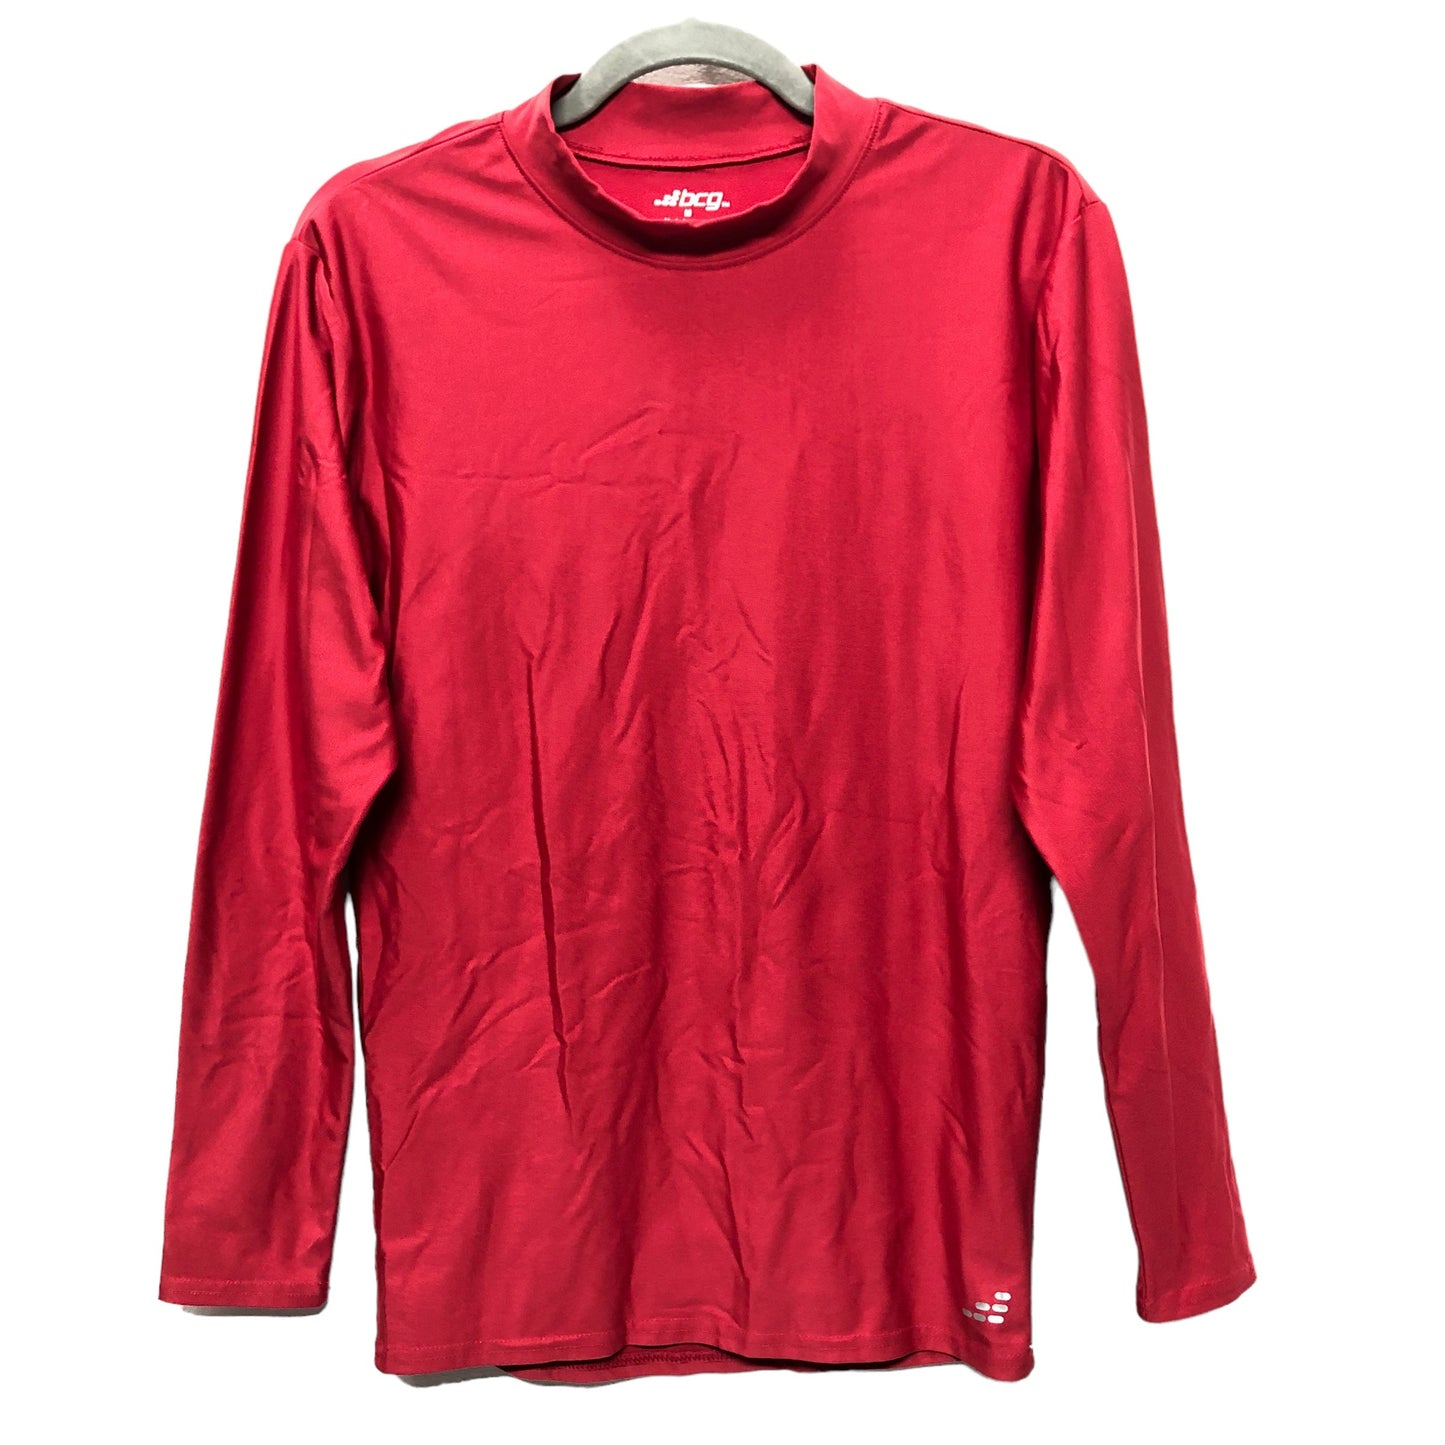 Athletic Top Long Sleeve Crewneck By Bcg  Size: M